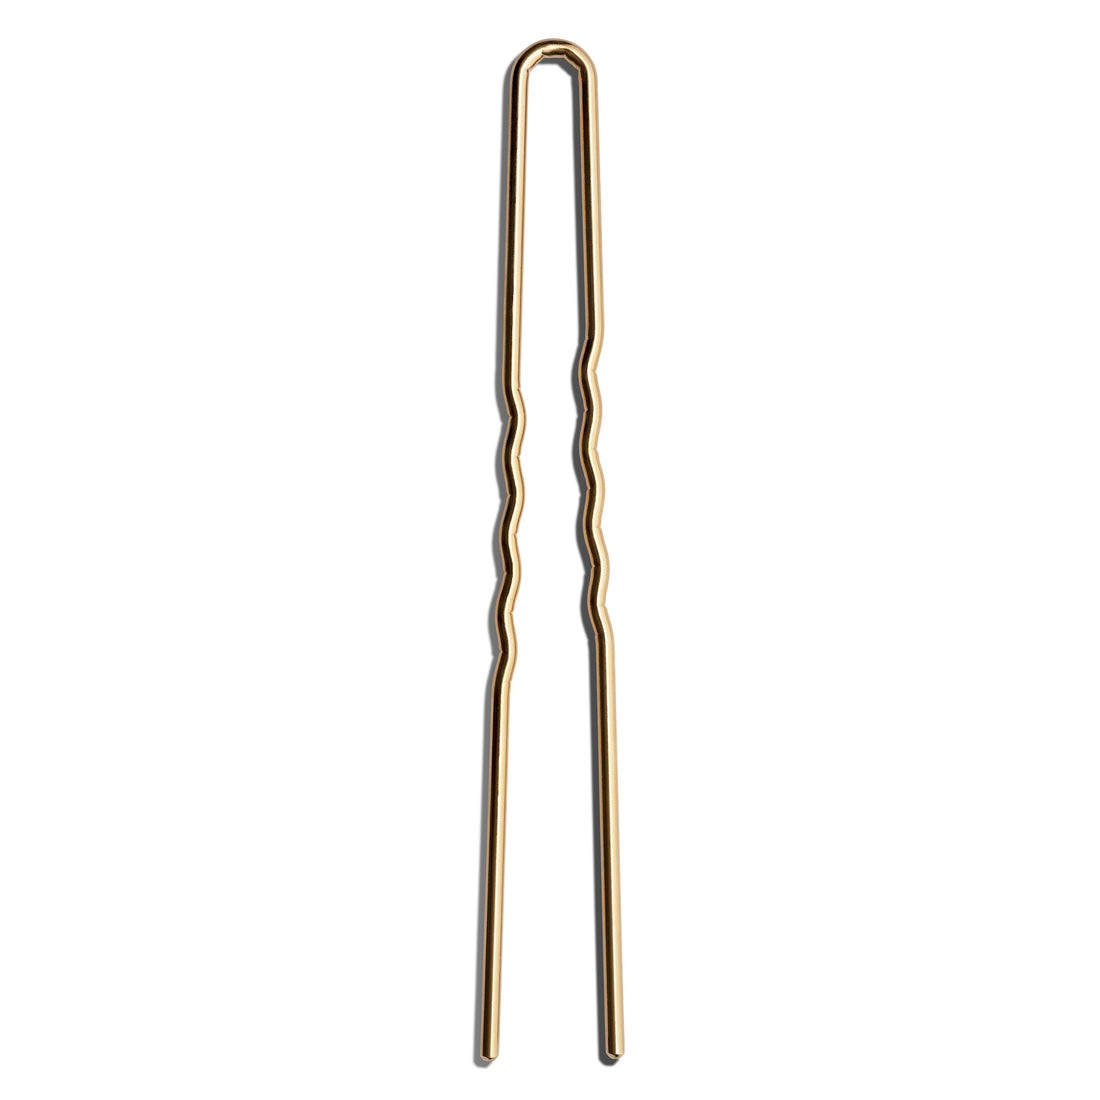 Day Rate Beauty Gold Power Pin (5.5in or 7in French Hair Pin) - Gold Petit Power Pin (5.5in French Hair Pin)